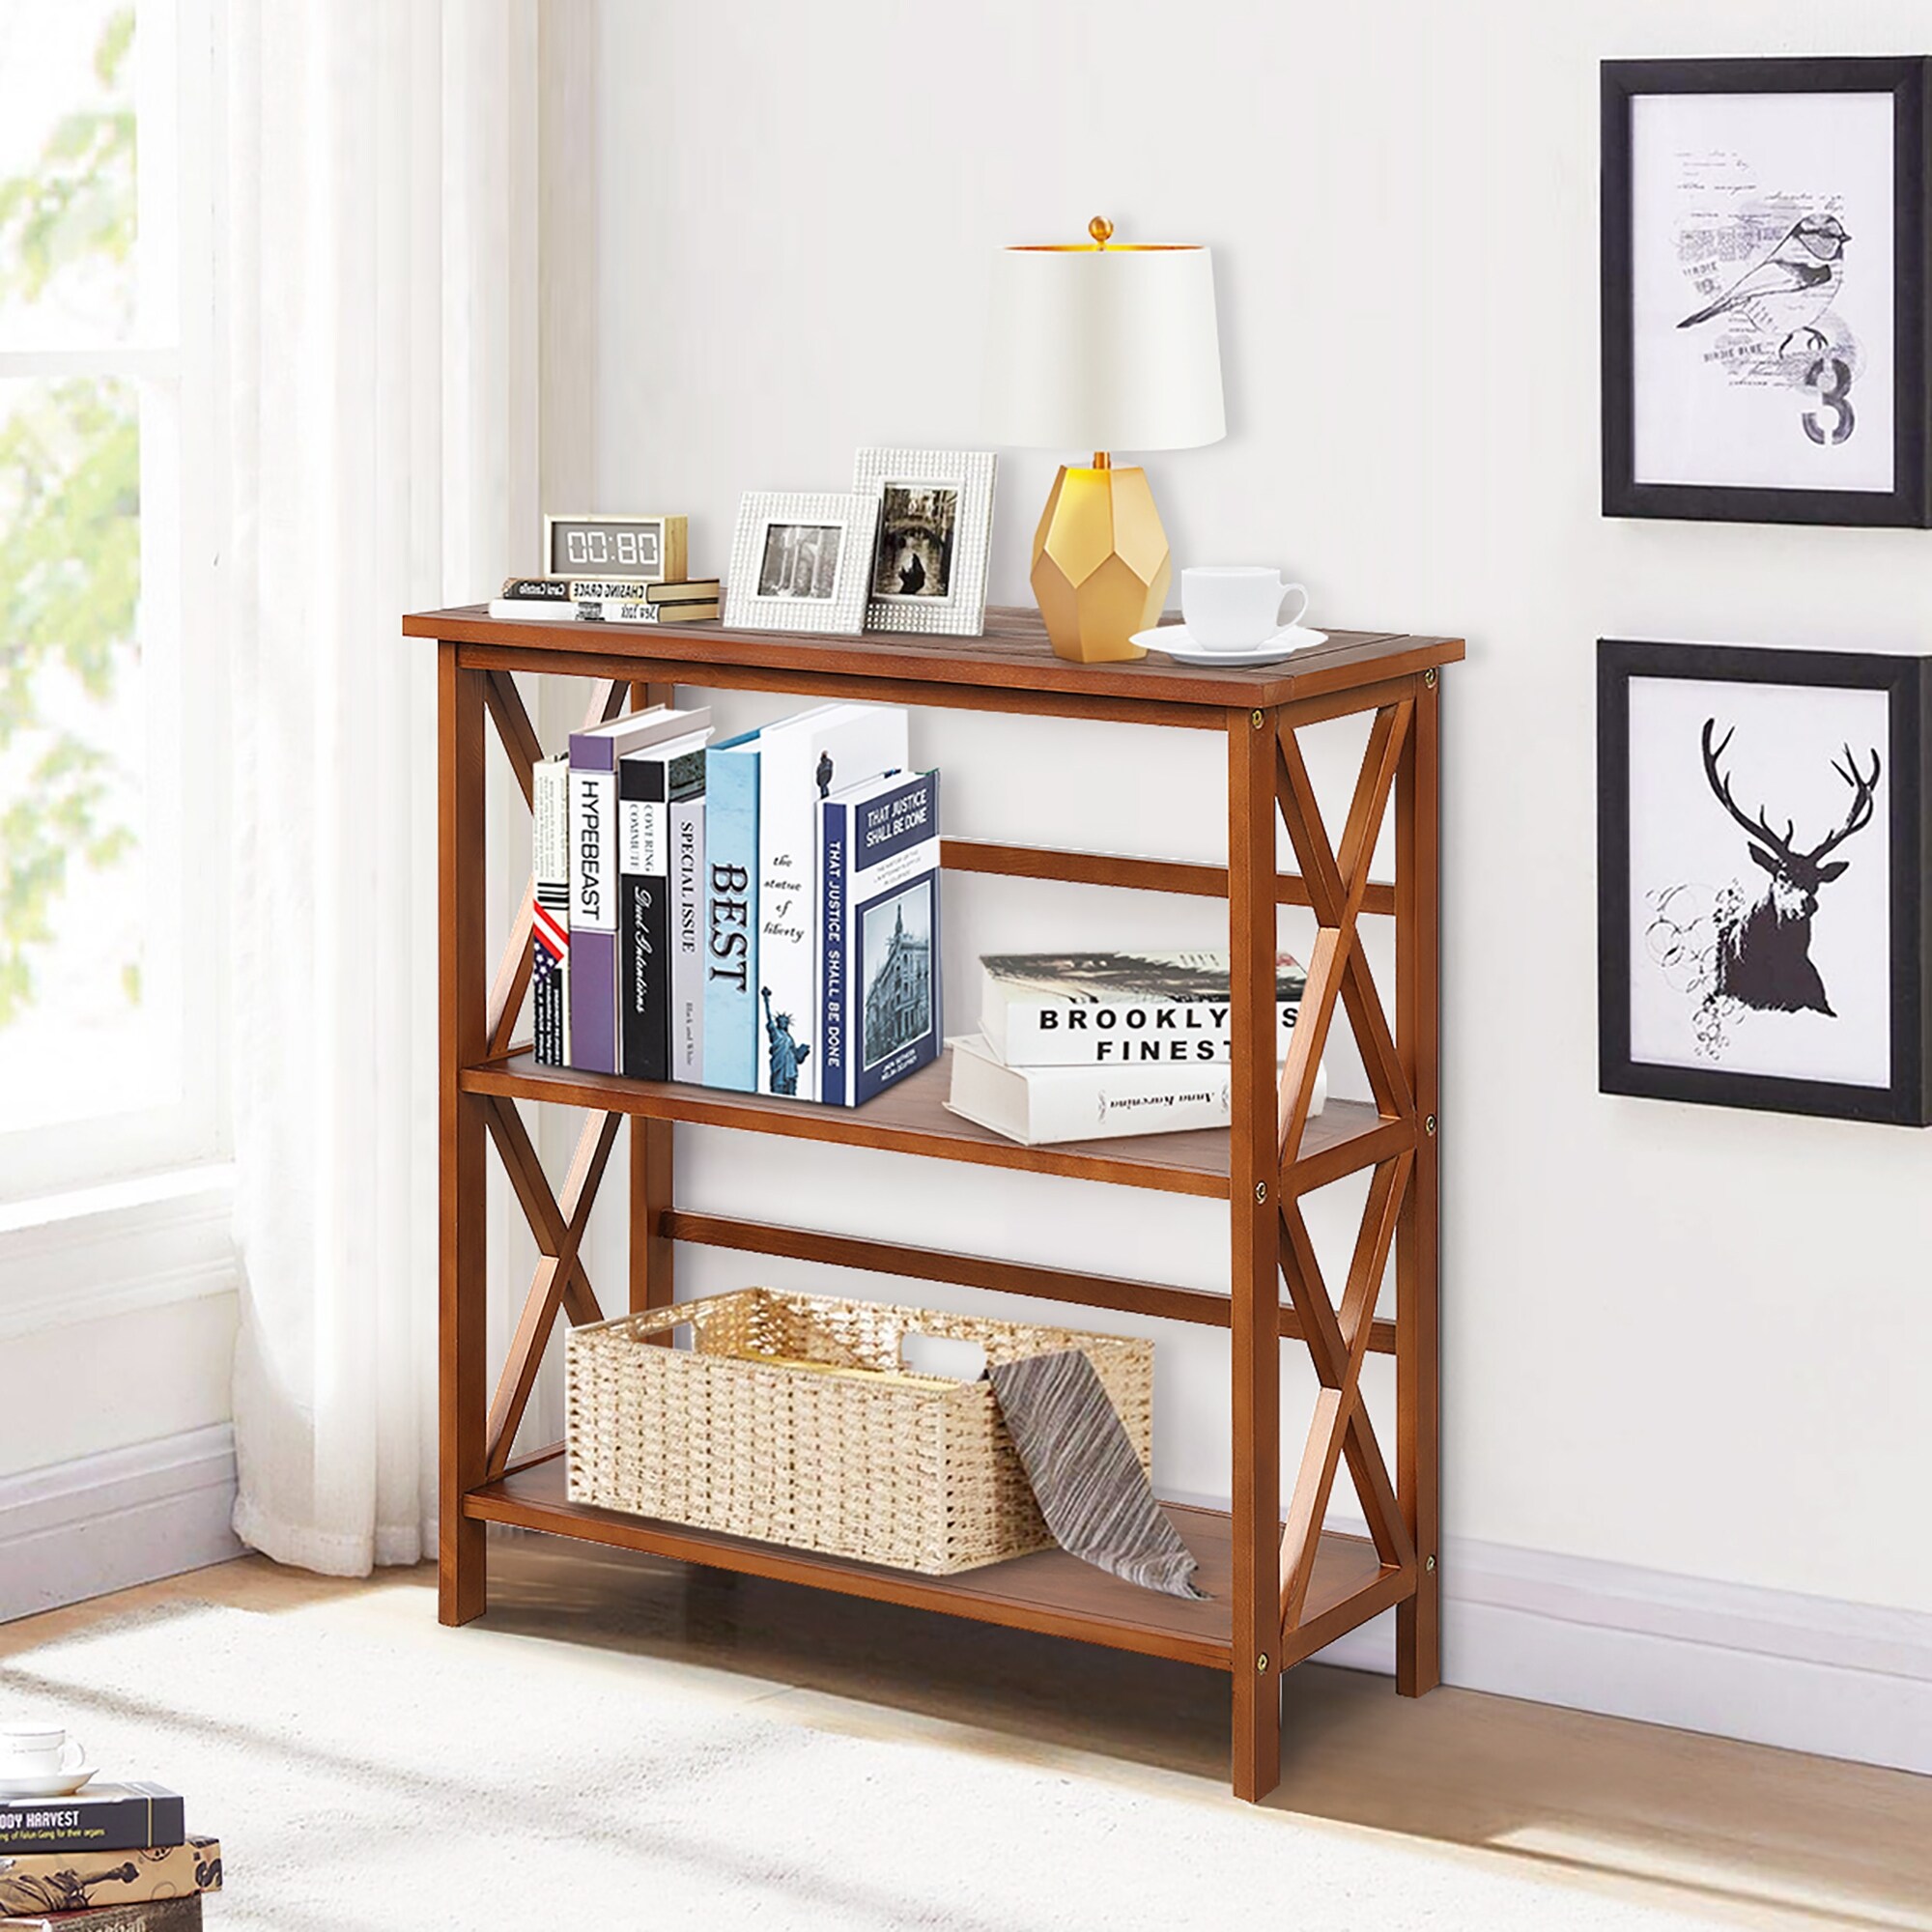 https://ak1.ostkcdn.com/images/products/is/images/direct/64a4818742eb5885dd54140921dff12df2f47c4d/3-Tier-Bookcase-and-Bookshelf-Wooden-Open-Shelf-Bookcase.jpg